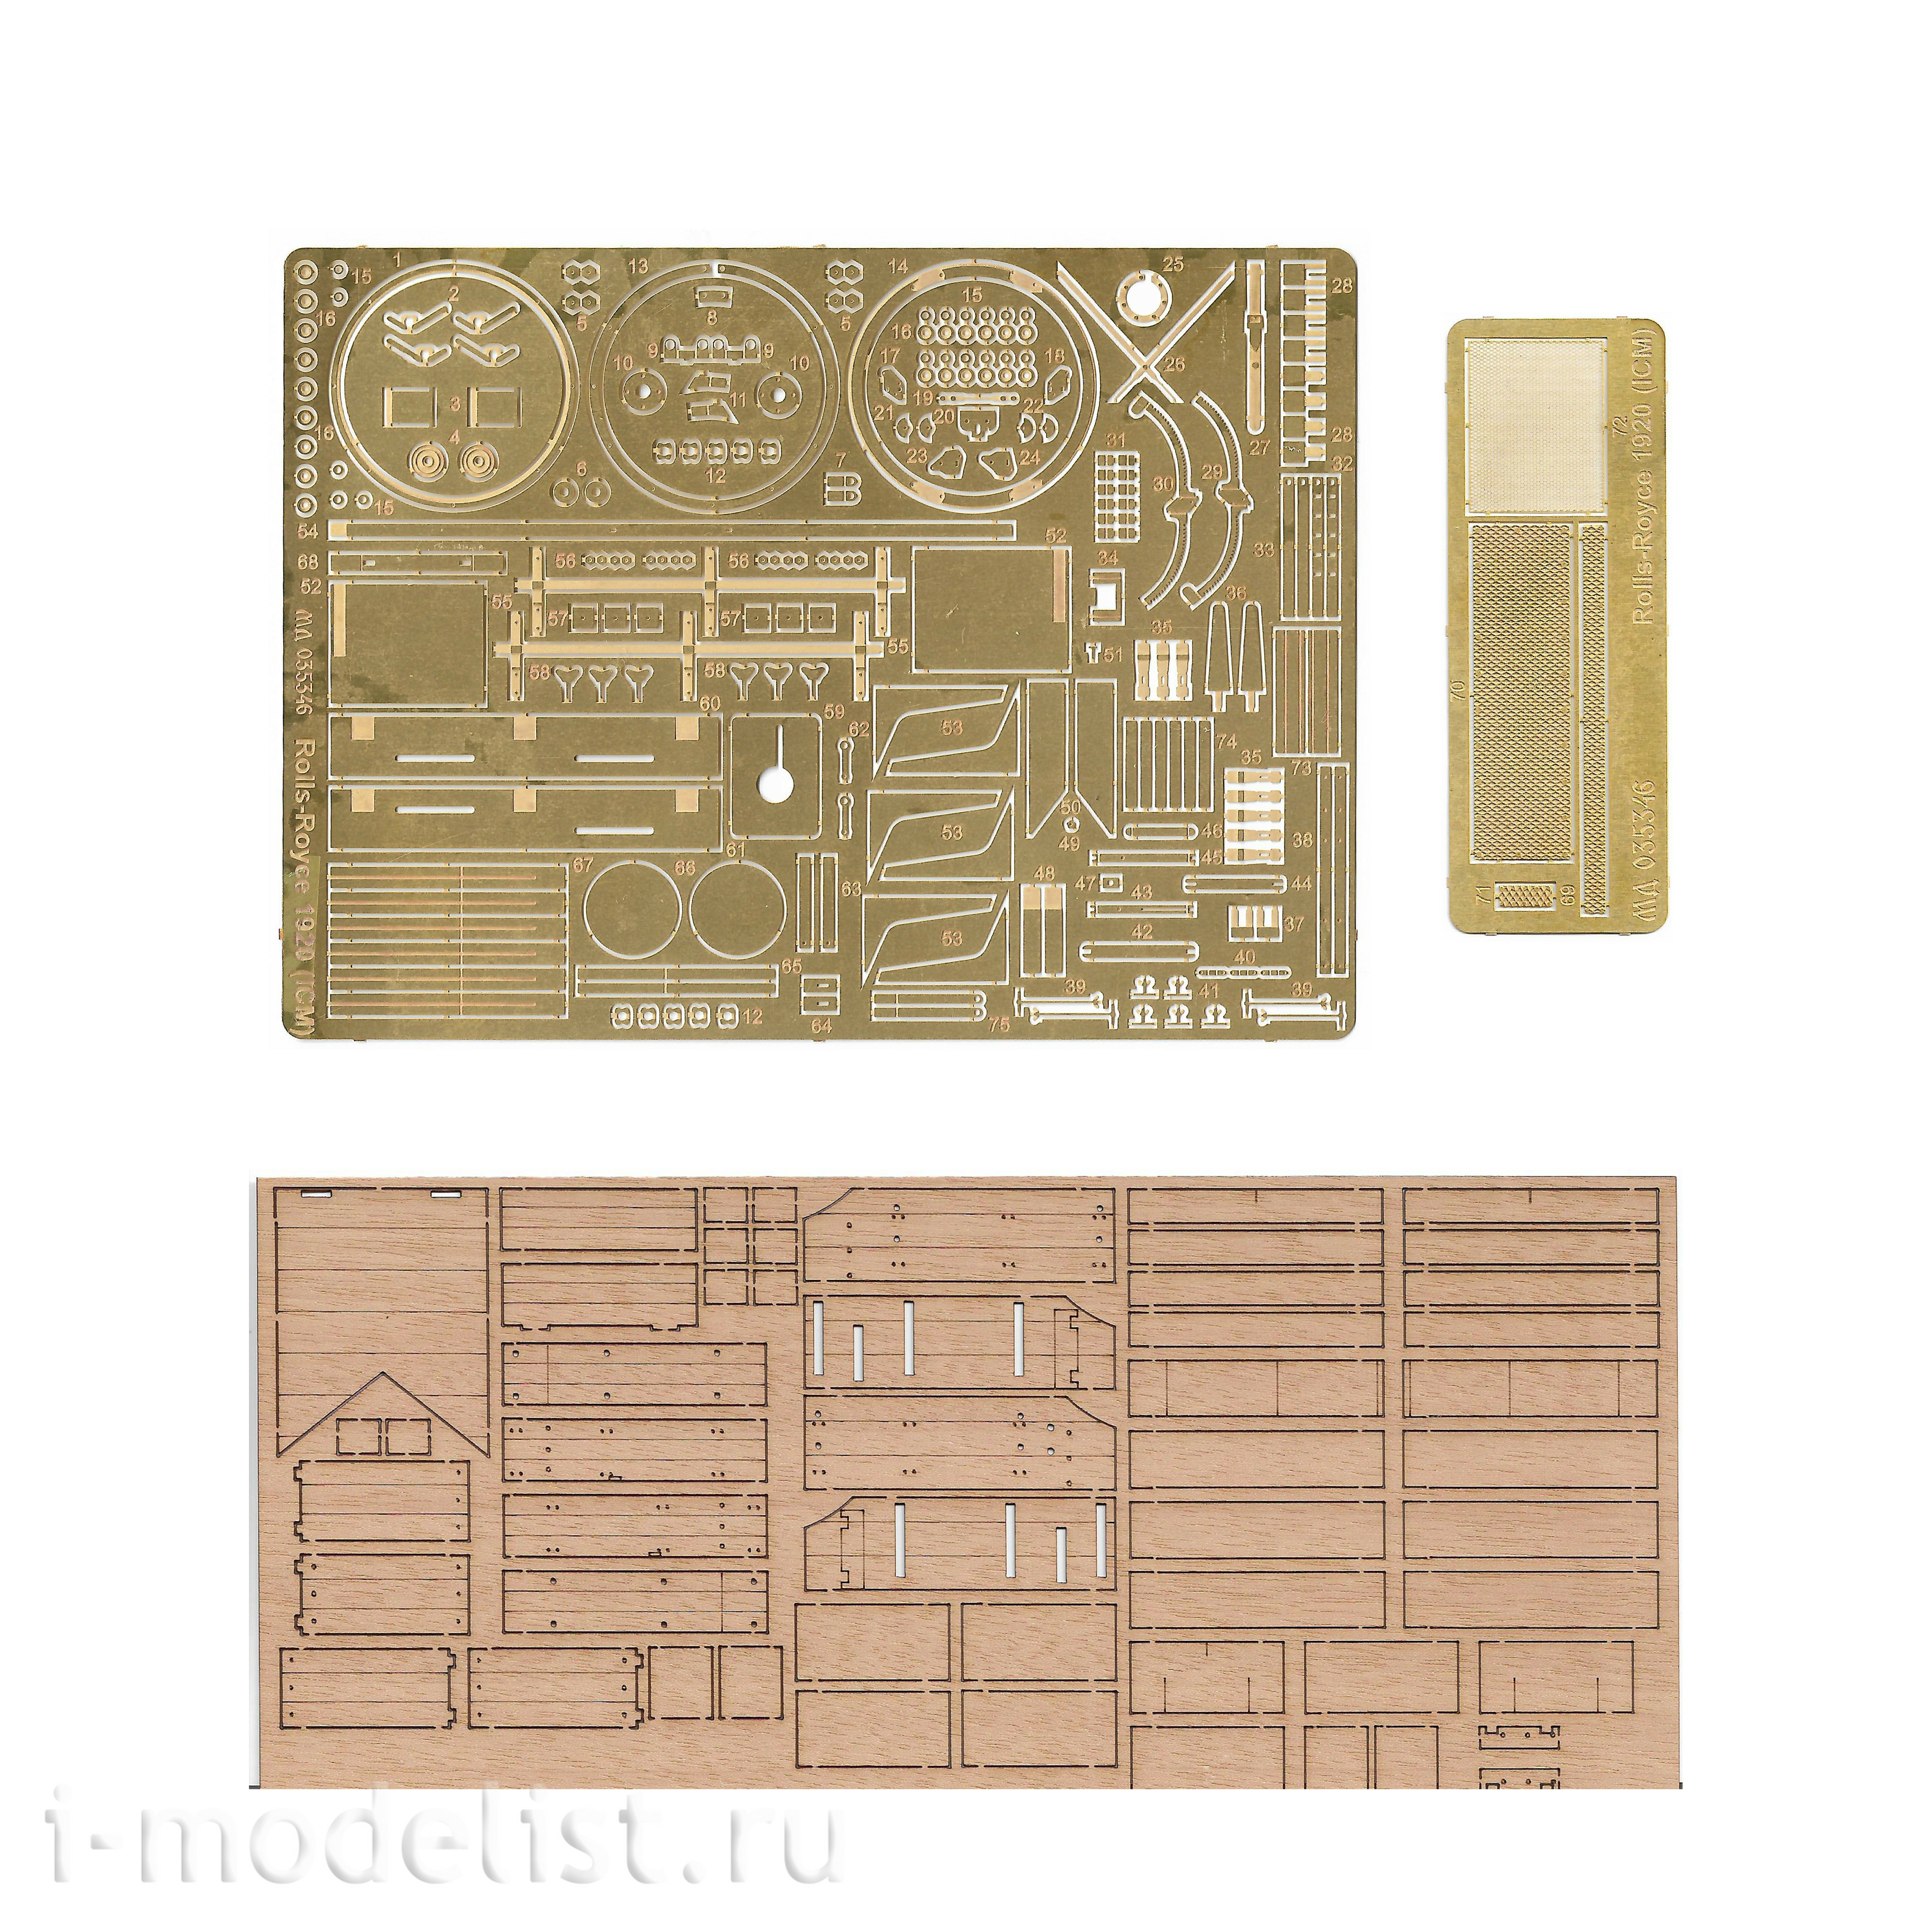 035346 Microdesign 1/35 photo Etching Rolls-Royce 1914 British armoured car